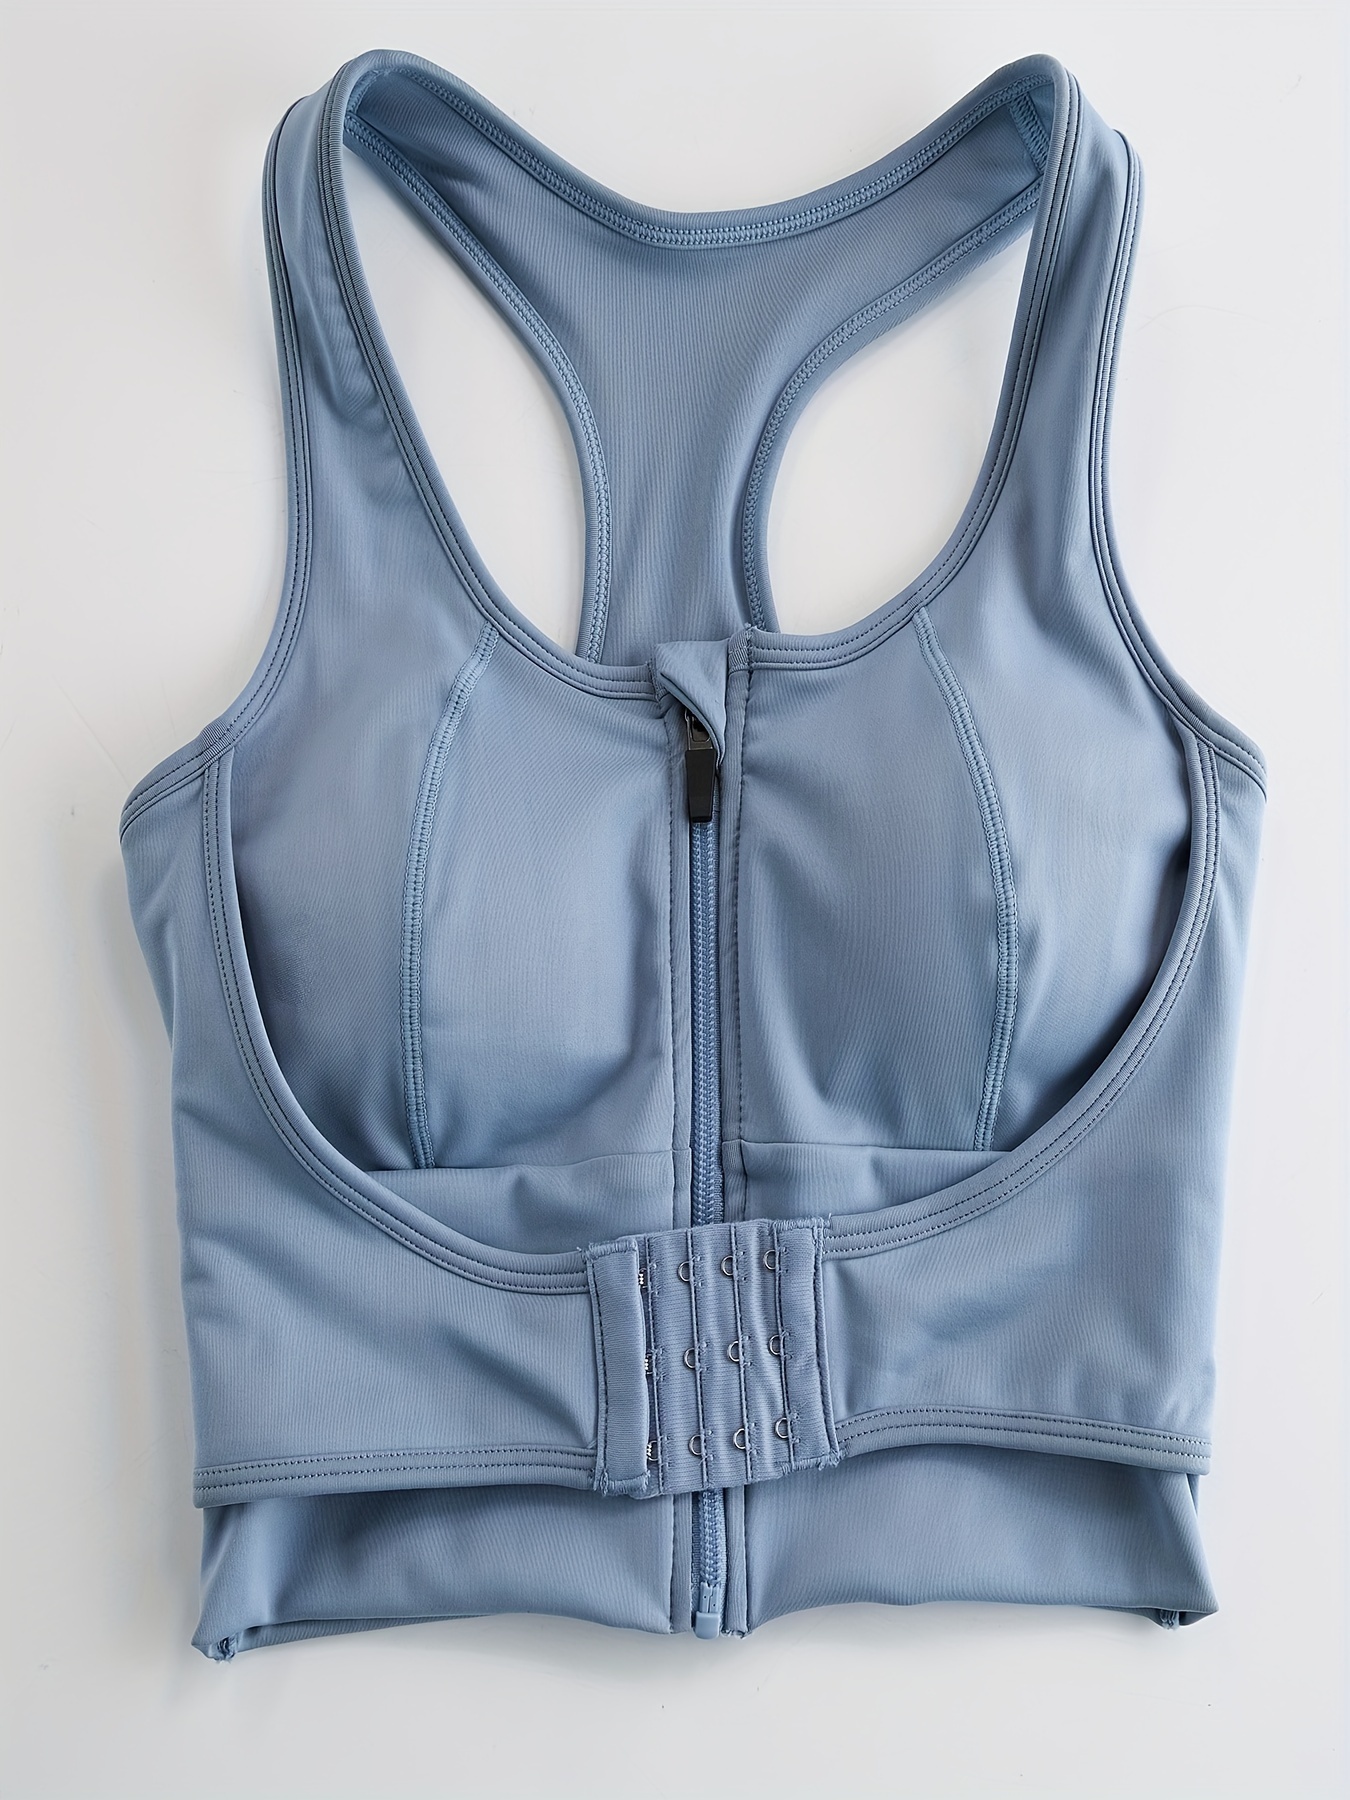 Summer Zip Front Sports Bra Llu 219 Front Zipper Tight Fit, Solid Color,  Nude, Perfect For Outdoor Fitness And Yoga From Zhangxuanang009, $18